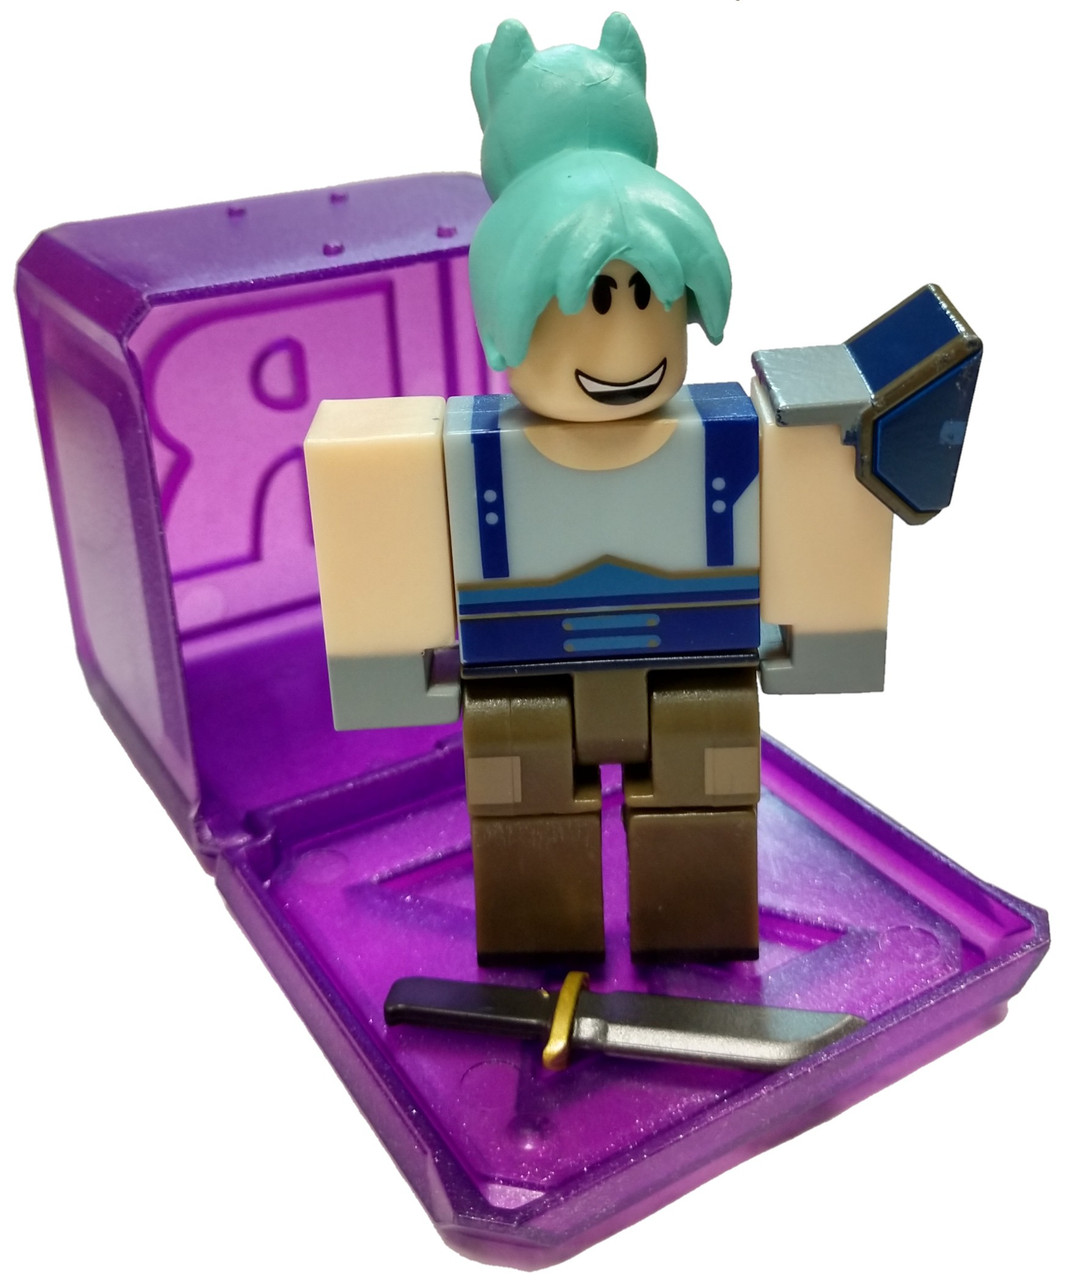 Roblox Celebrity Collection Series 3 Night Of The Werewolf Jill Frost 3 Mini Figure With Cube And Online Code Loose Jazwares Toywiz - mermaids sandcastles character roblox figure collection